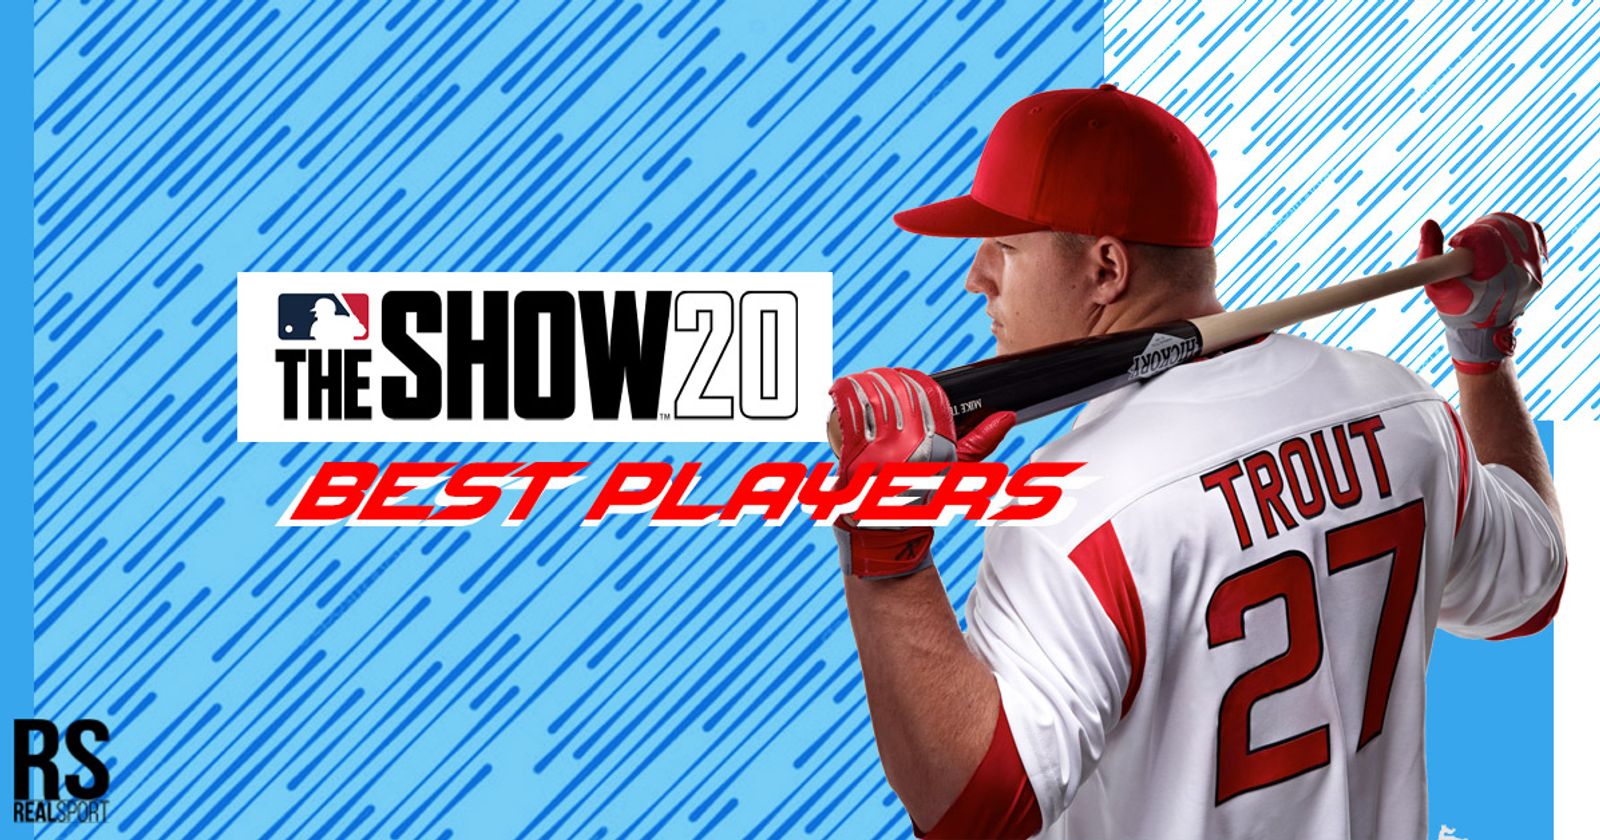 NEW *96* Trevor Story Is The BEST SS In MLB The Show 21 Diamond Dynasty!! 